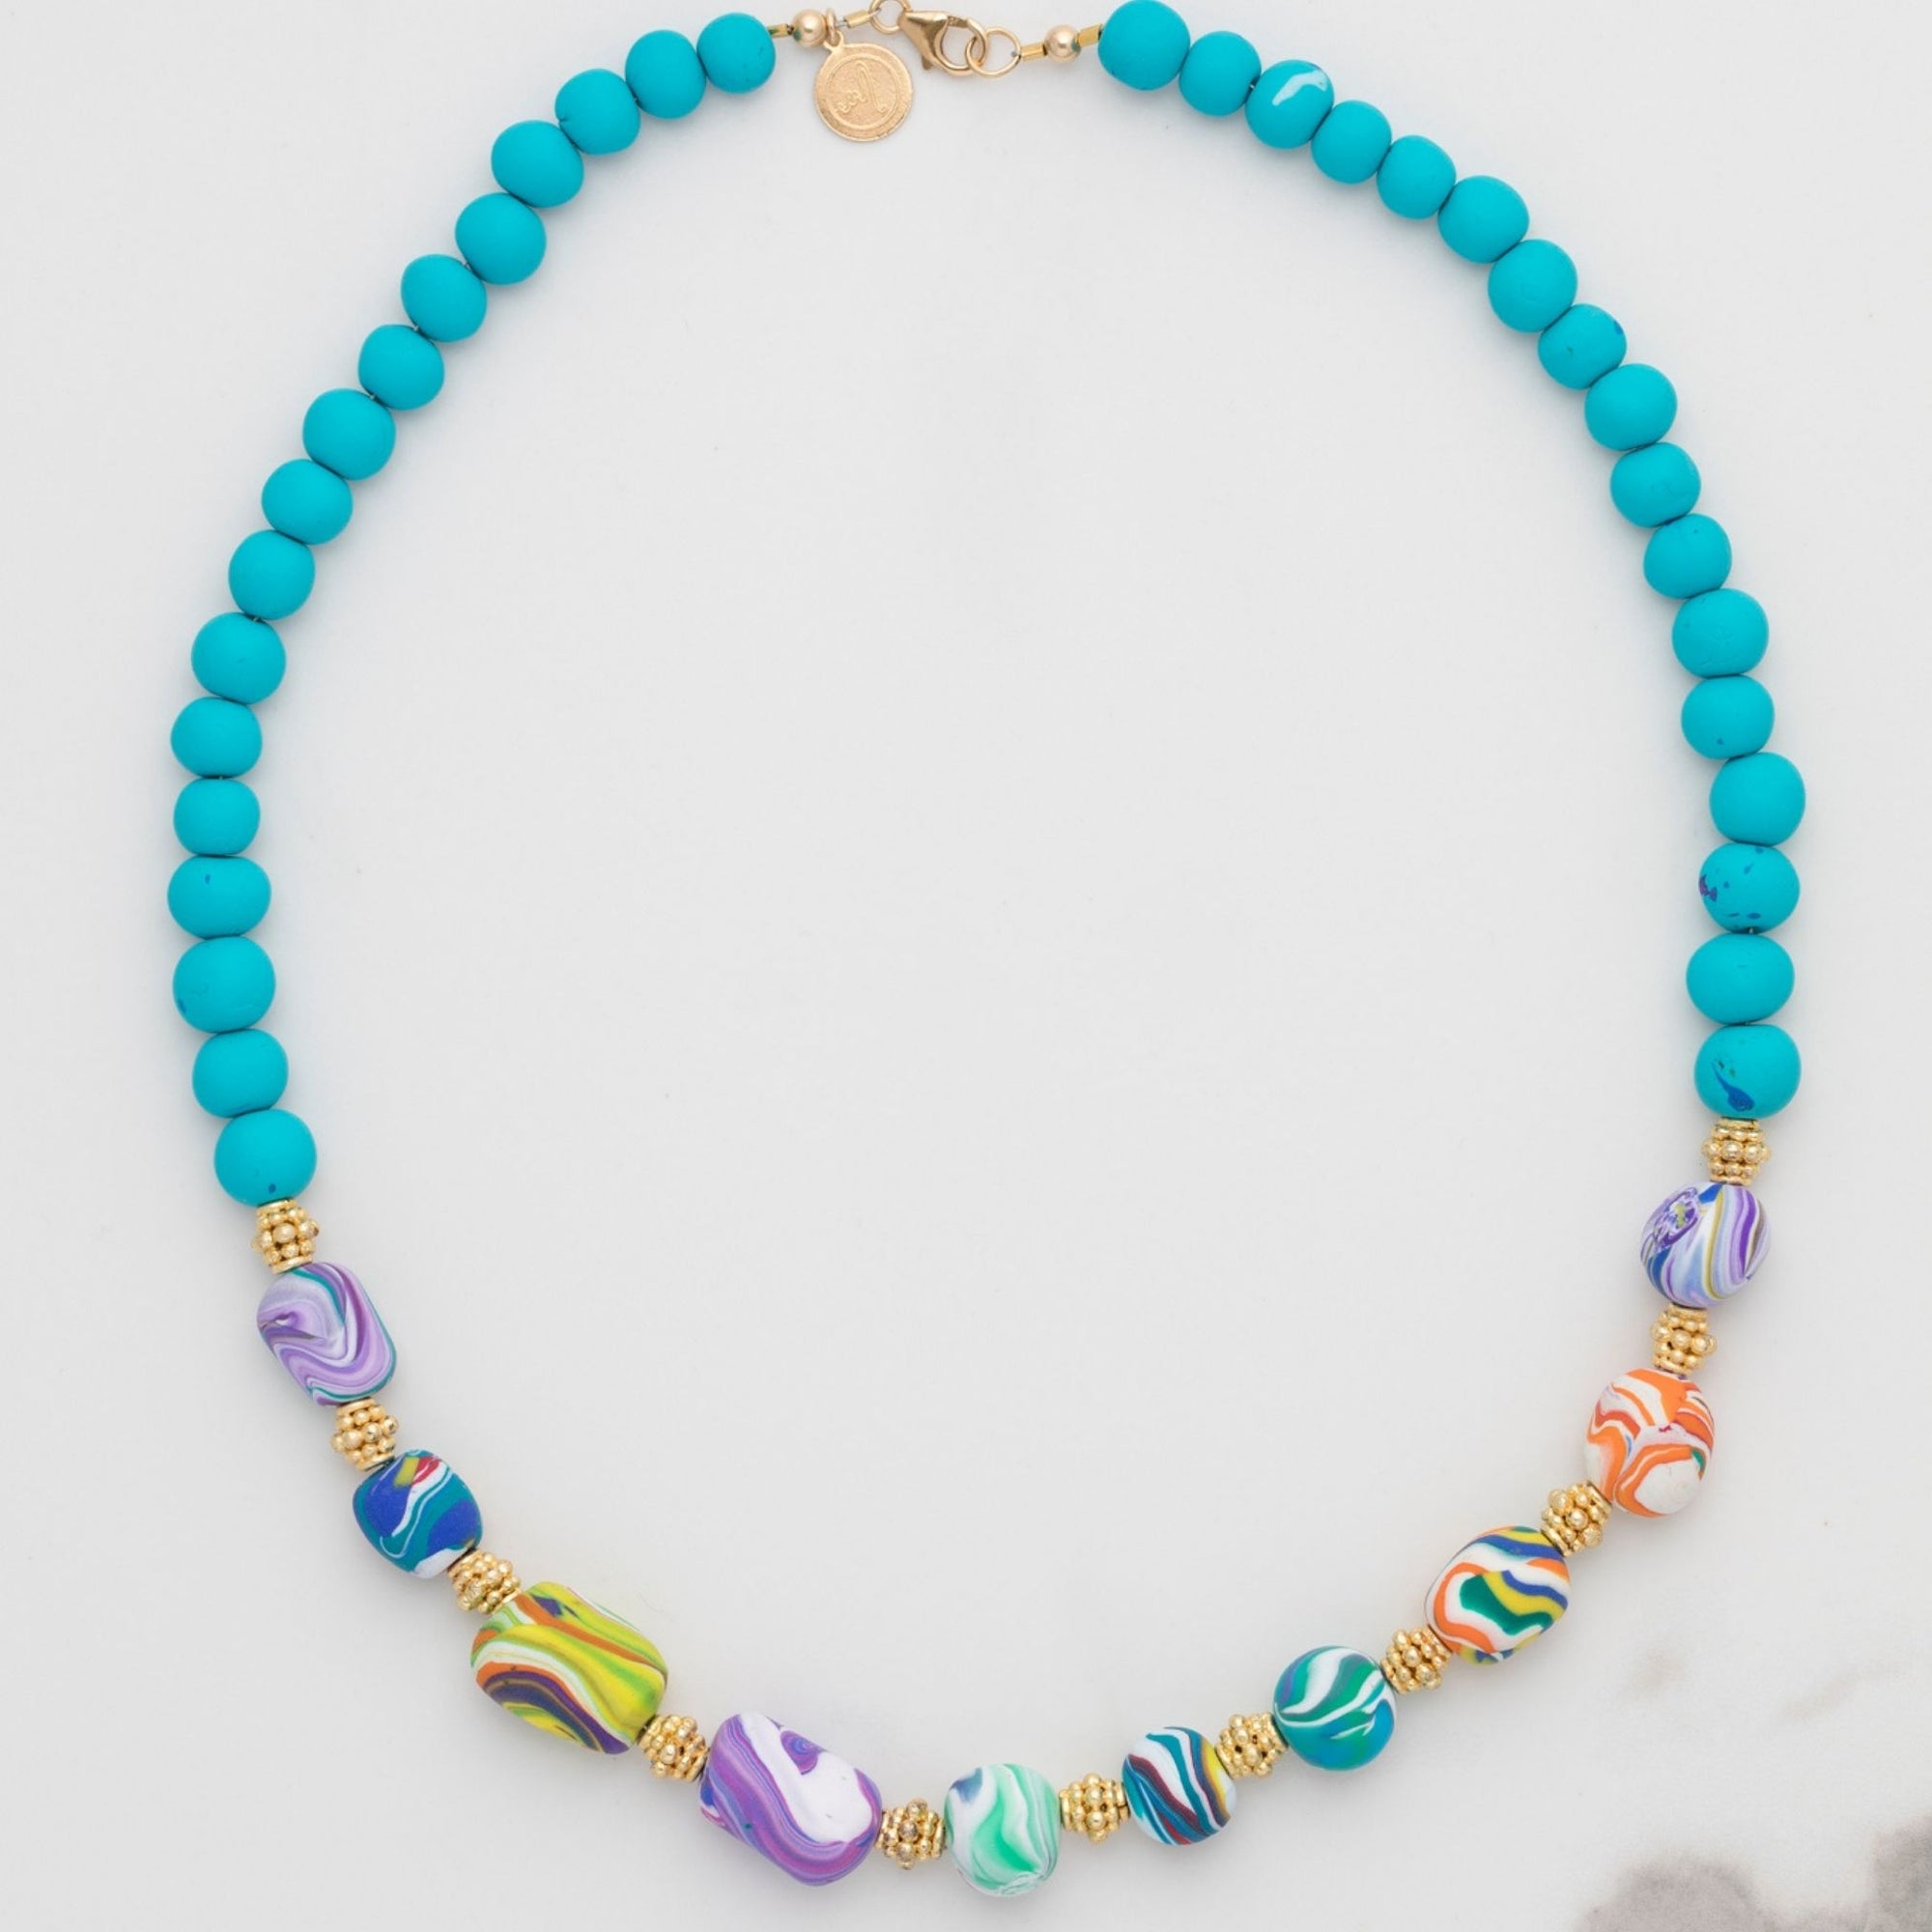 Statement Necklace  Unique Marina-Ra Designs Handmade Beads in Turquoise and Multi-coloured 